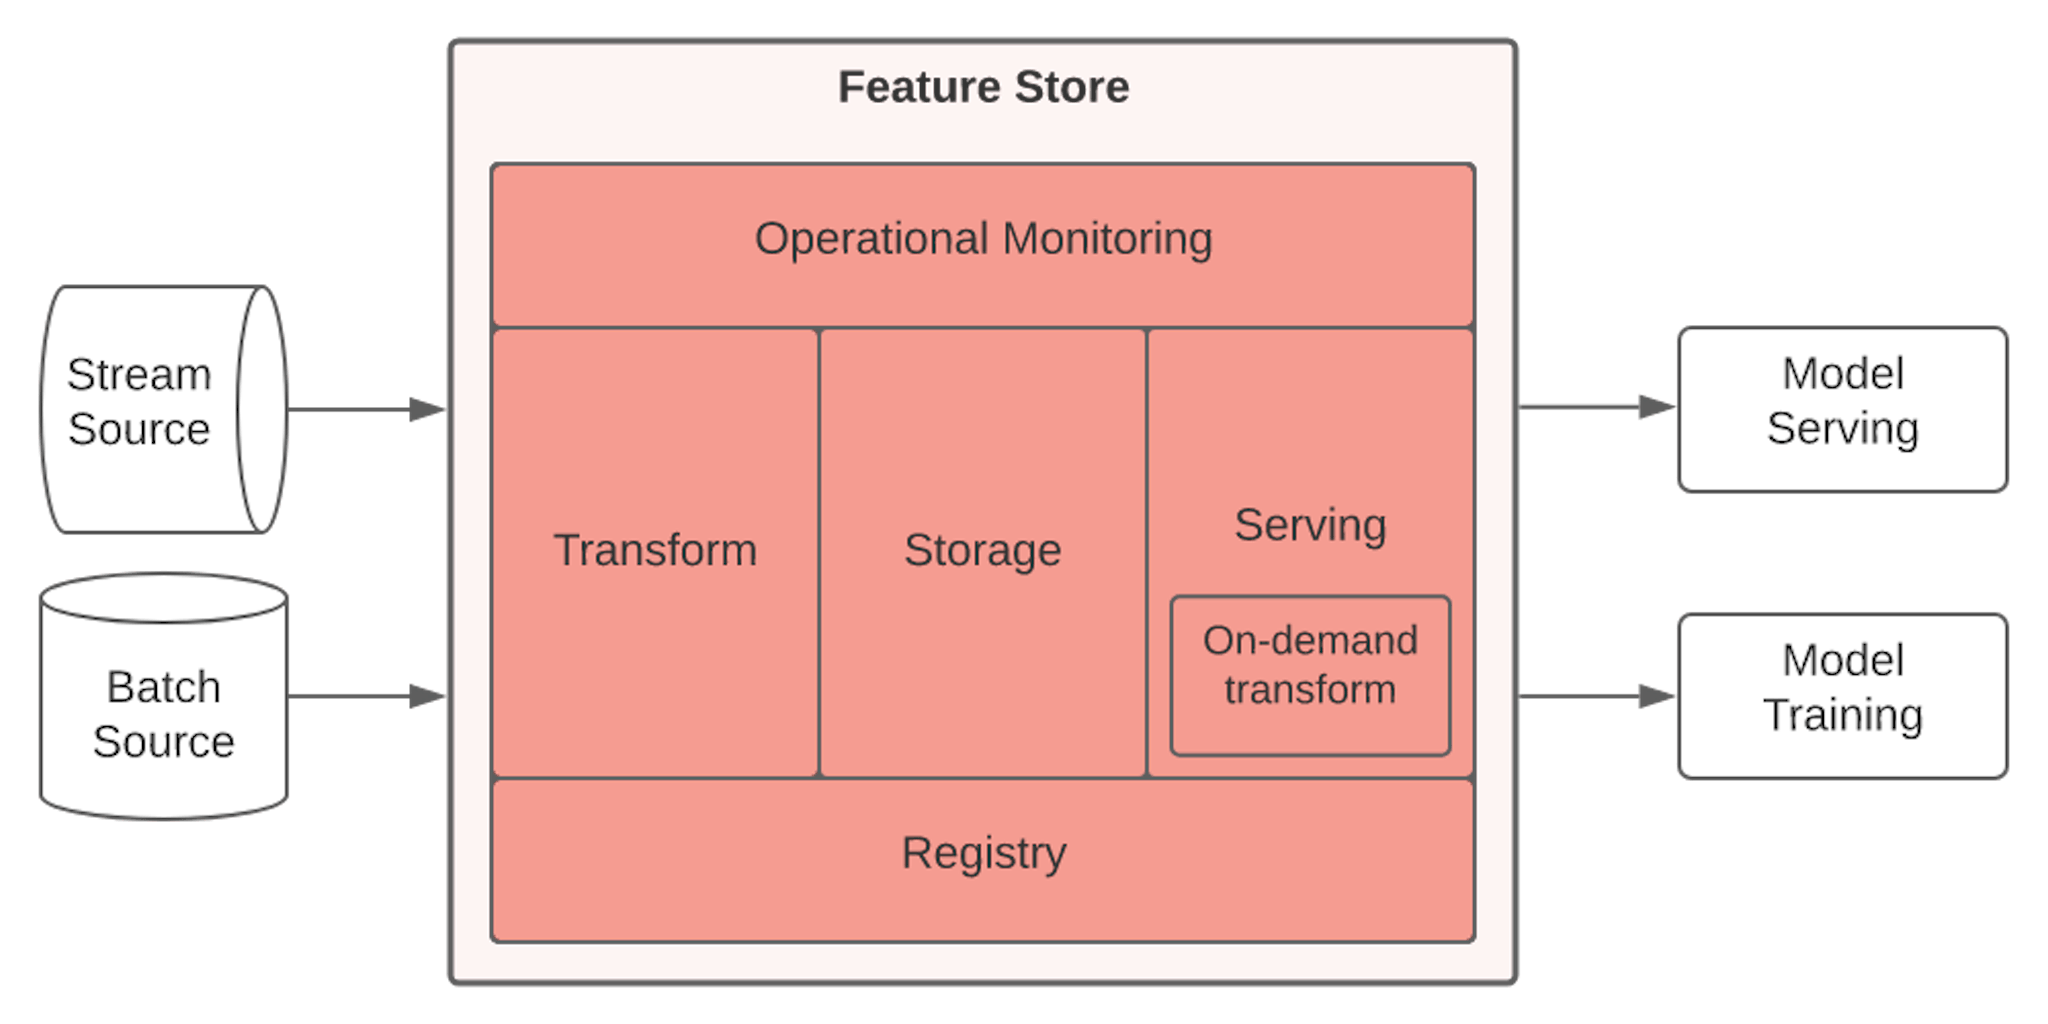 Main components of a features store, courtesy of the Feast blog